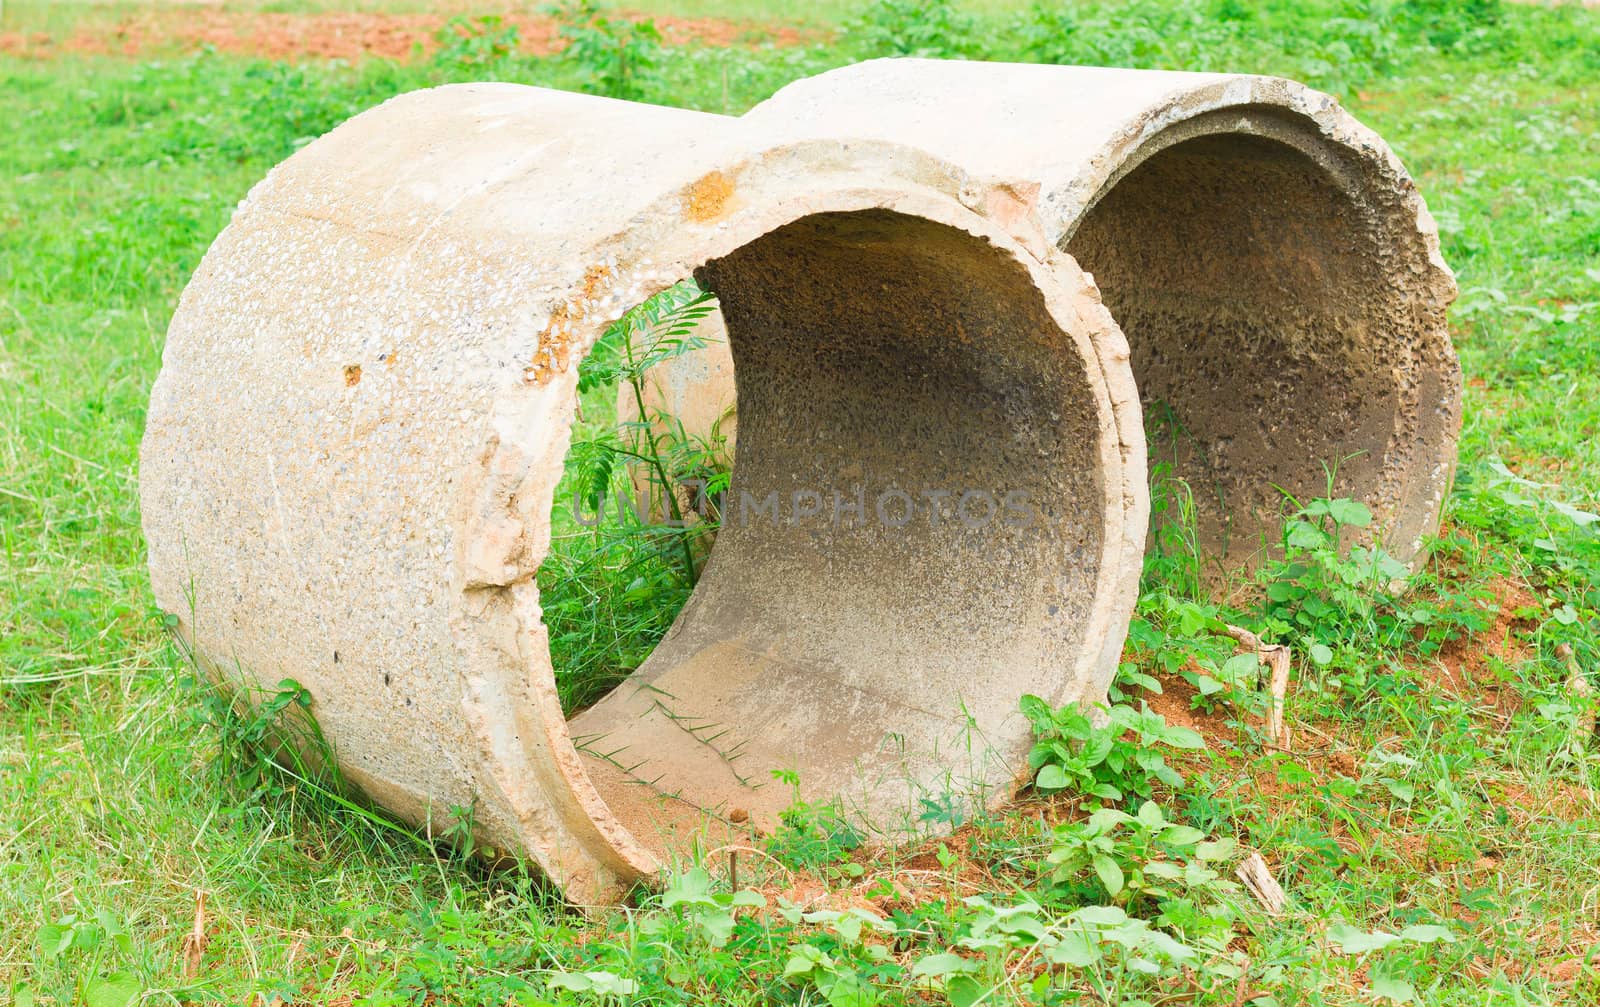 This is a old Concrete pipe on ground with Weed